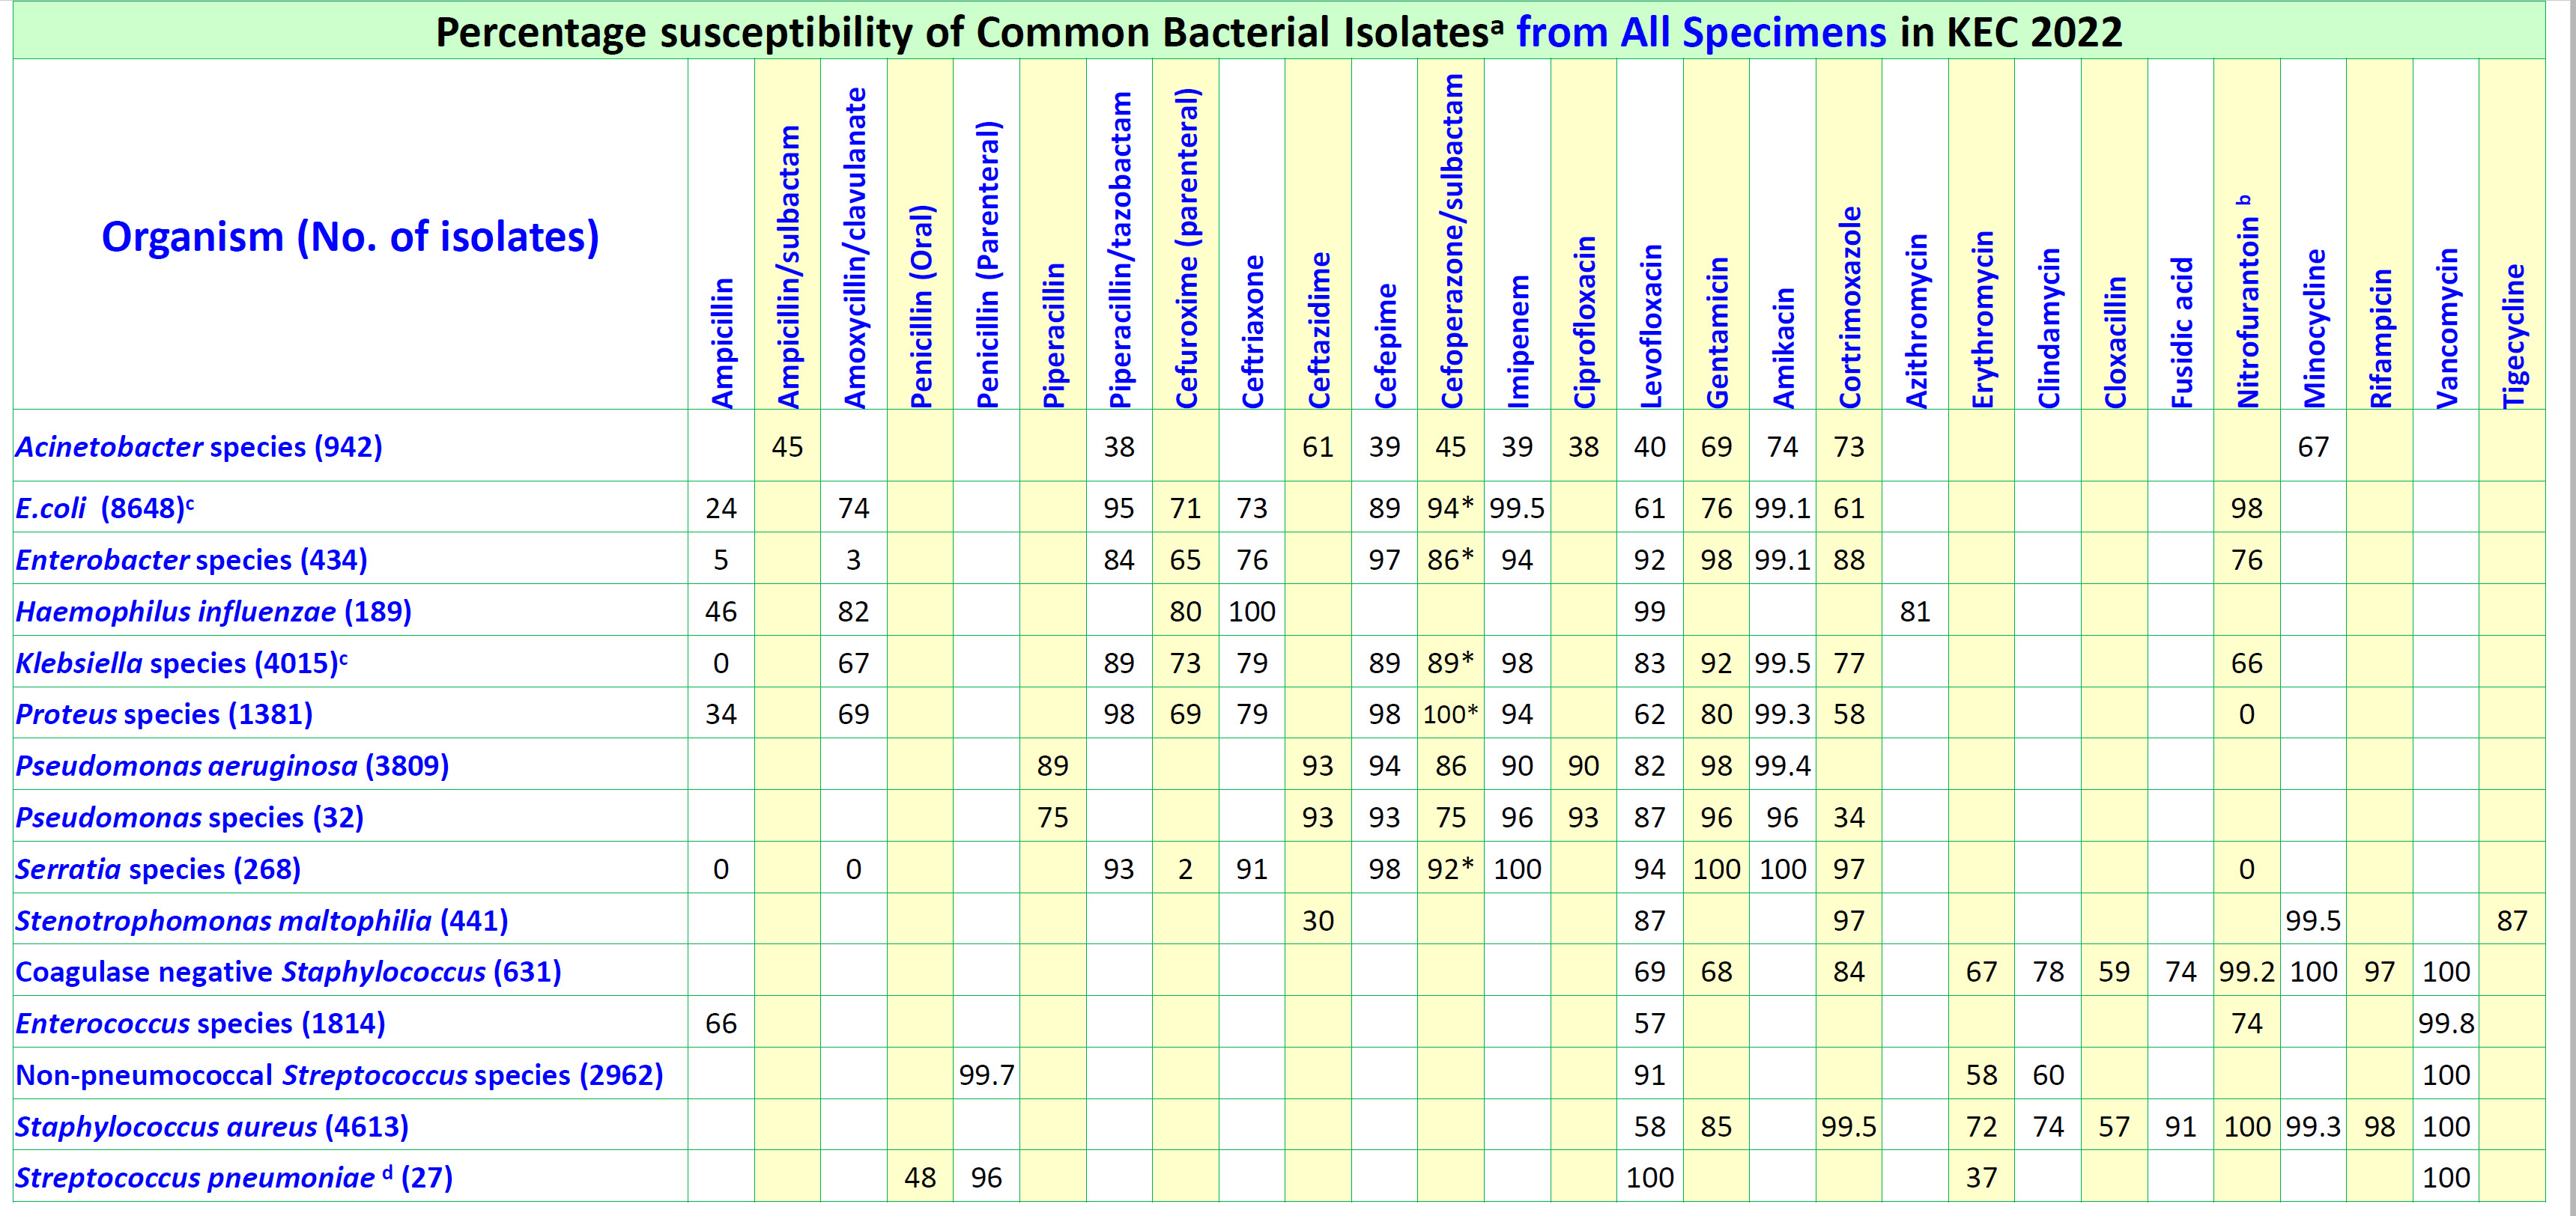 Table UCH-1. Antibiogram for common bacterial isolates, United Christian Hospital, 2018